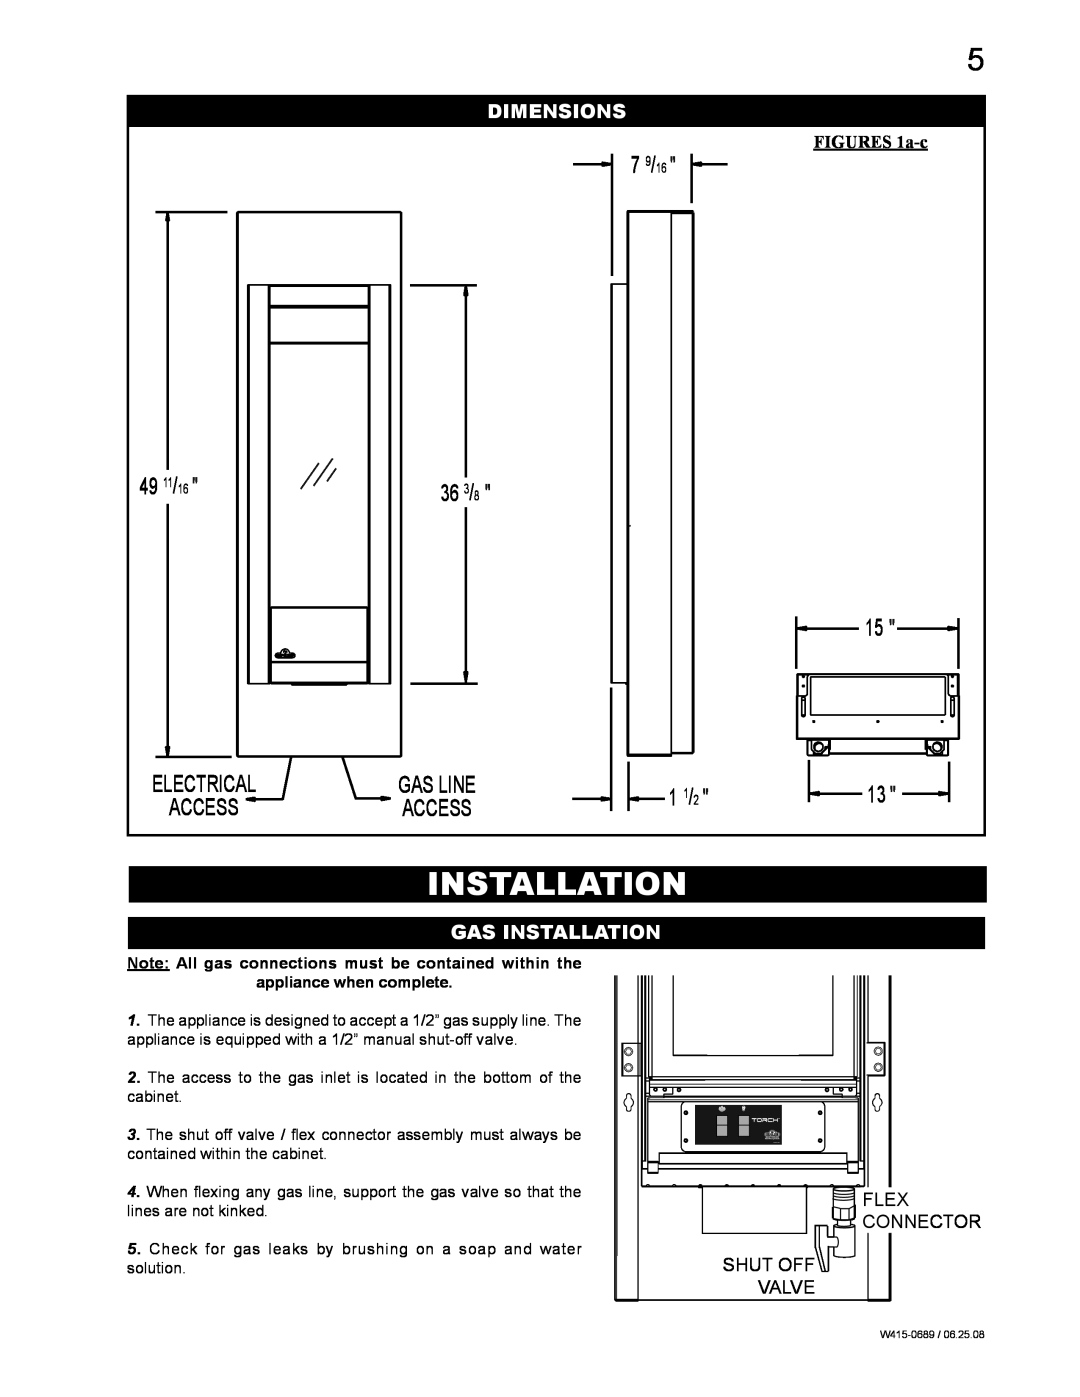 Napoleon Fireplaces GSST8N, GSST8P 7 9/16, 1 1/2, Dimensions, Gas Installation, 49 11, Electrical Access, FIGURES 1a-c 